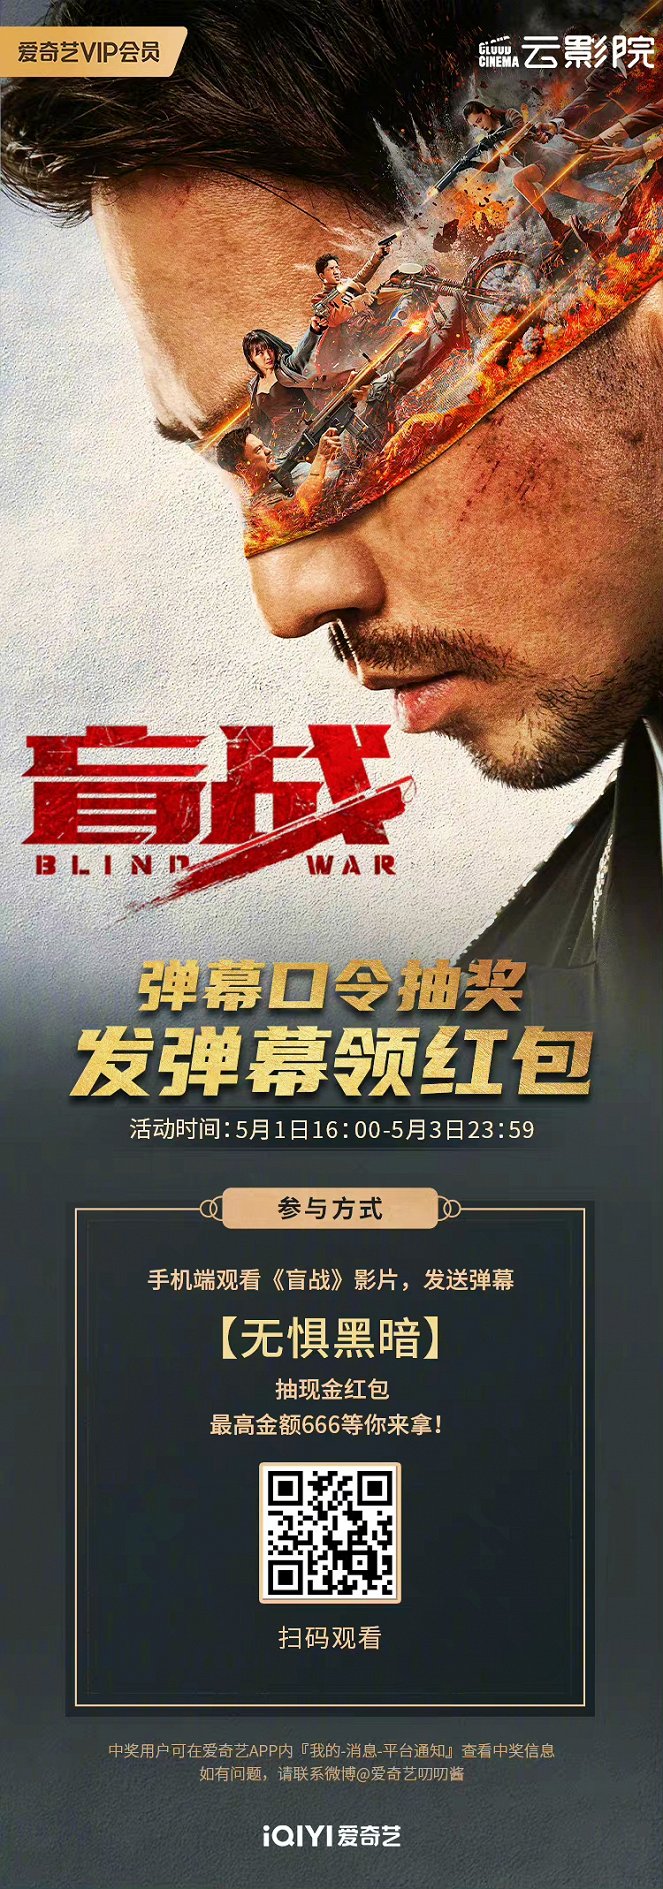 Blind War - Posters